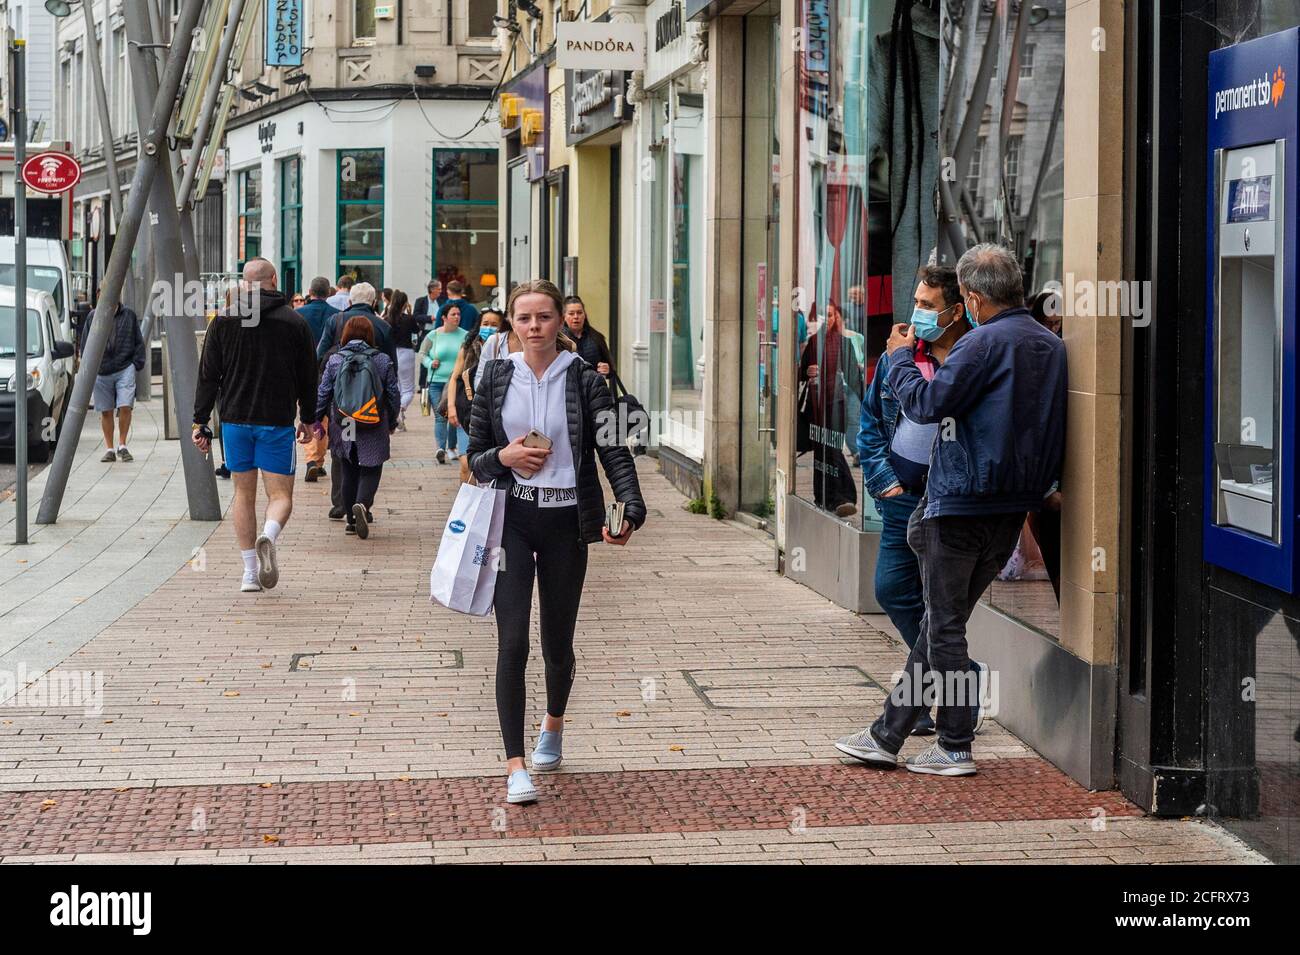 Cork, Ireland. 7th Sep, 2020. Many shoppers were walking the streets of Cork without face masks this morning, although some people were wearing masks. Tanaiste Leo Varadkar is under pressure to revel the date when so called 'wet pubs' can reopen, although that date has so far not been revealed. Credit: AG News/Alamy Live News Stock Photo